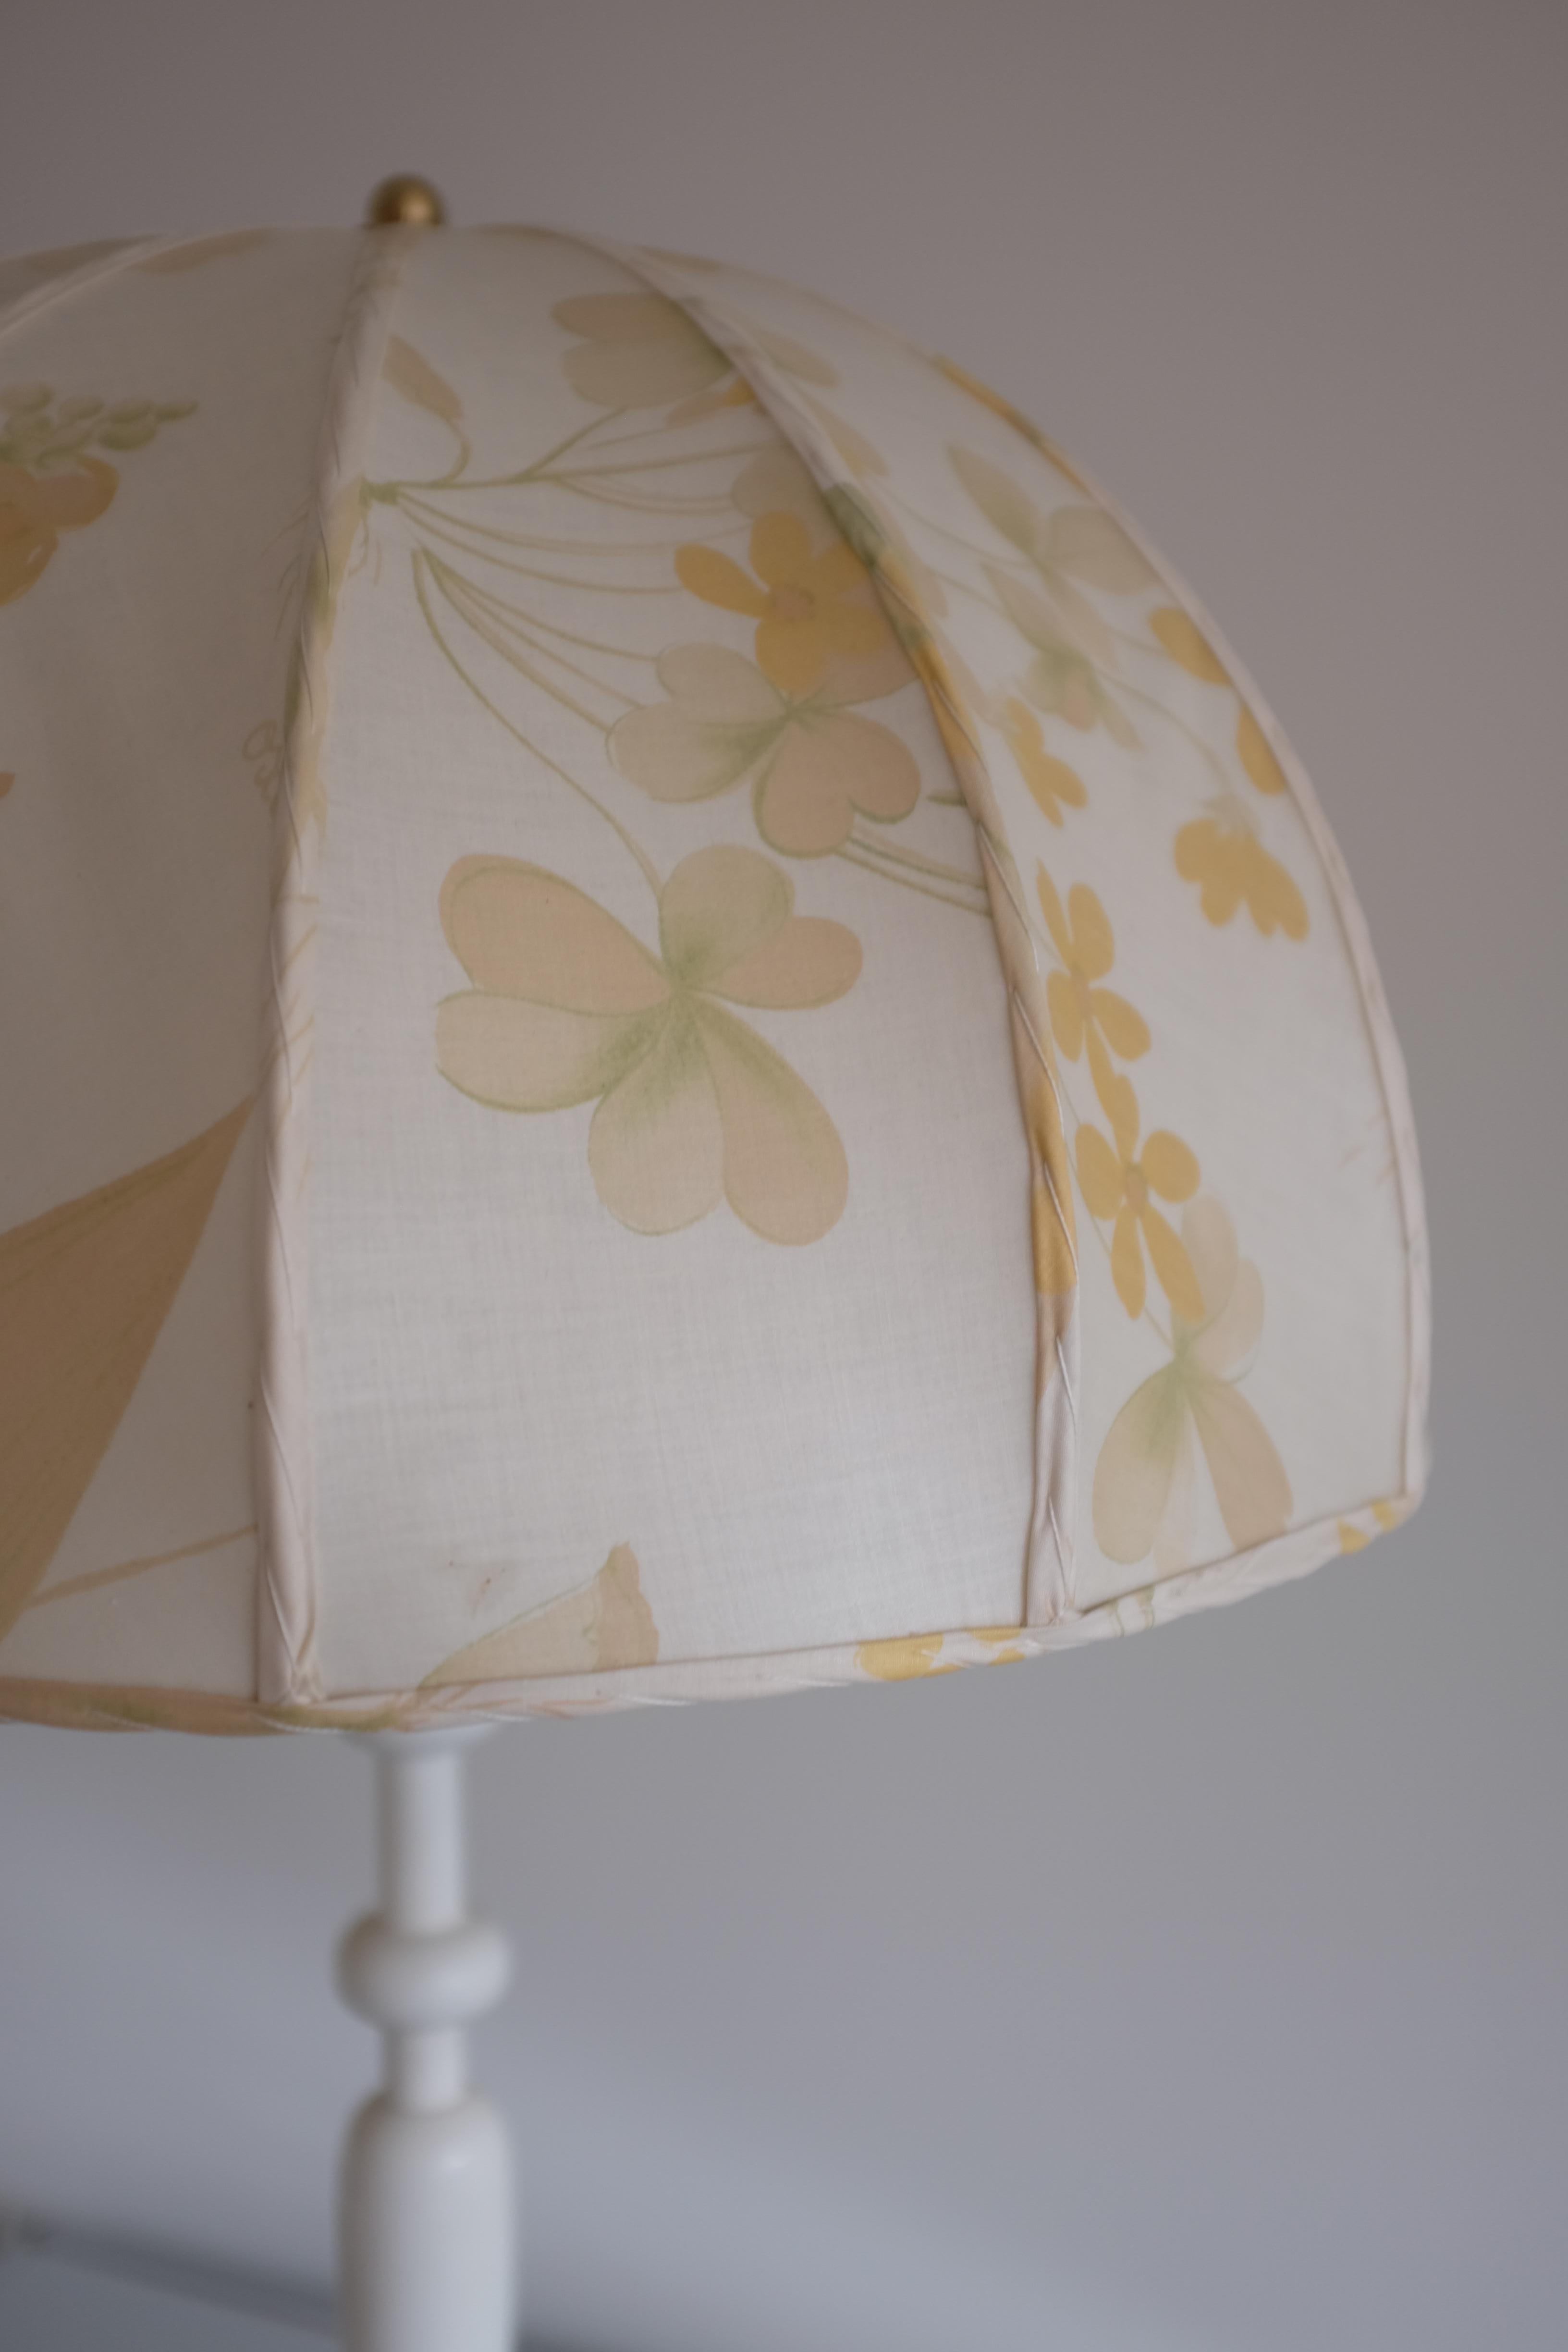 Rare Large Table lamp modell 2563 by Josef Frank for Svenskt tenn, Sweden. Carved lamp arm in a white lacquered color with a large flower printed lamp shade. The fabric is called 